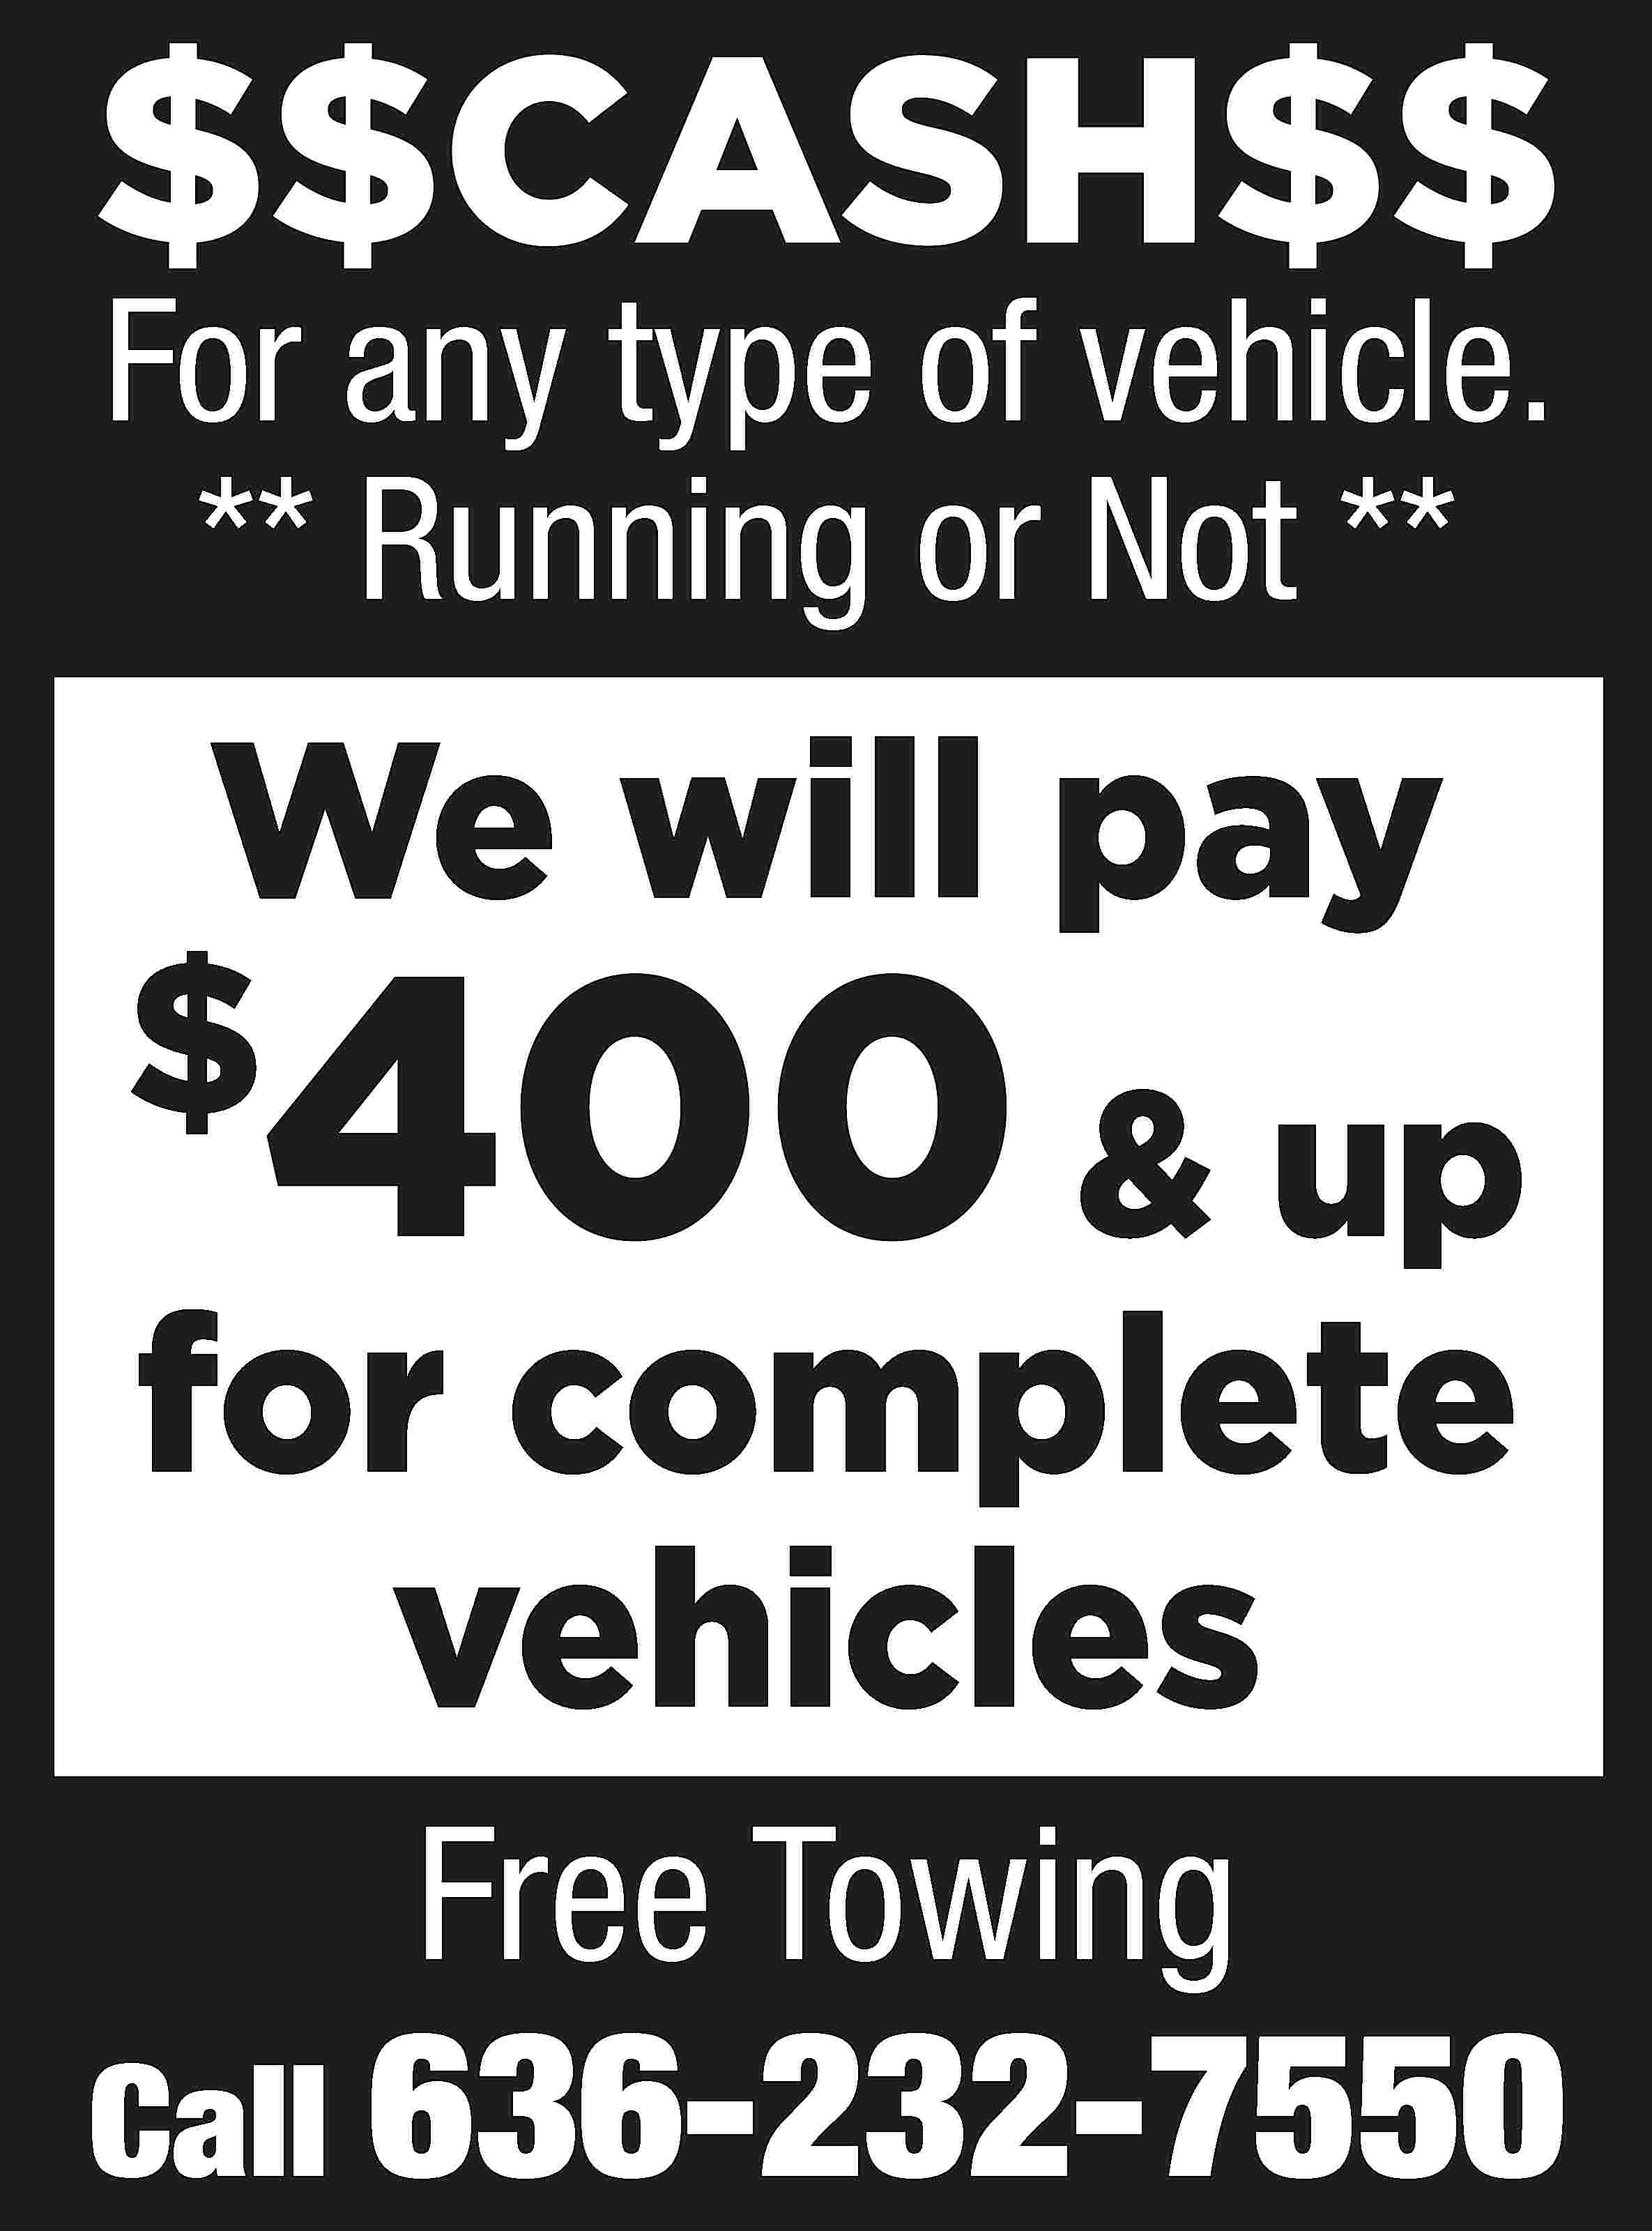 $$CASH$$ For any type of  $$CASH$$ For any type of vehicle. ** Running or Not ** We will pay $ & up for complete vehicles 400 Free Towing Call 636-232-7550